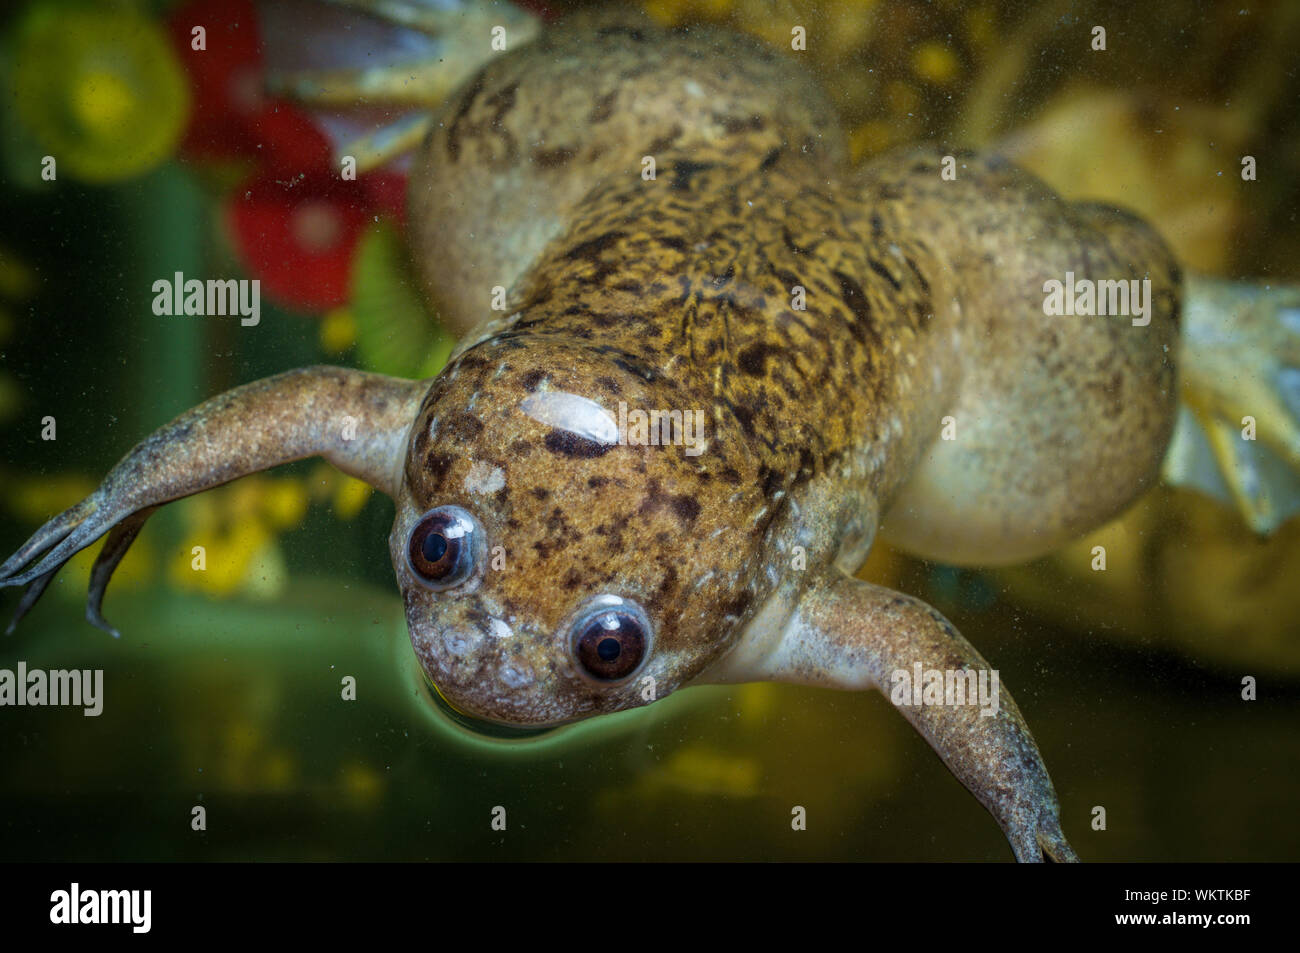 Large adult African clawed frog swimming in dirty water Stock Photo